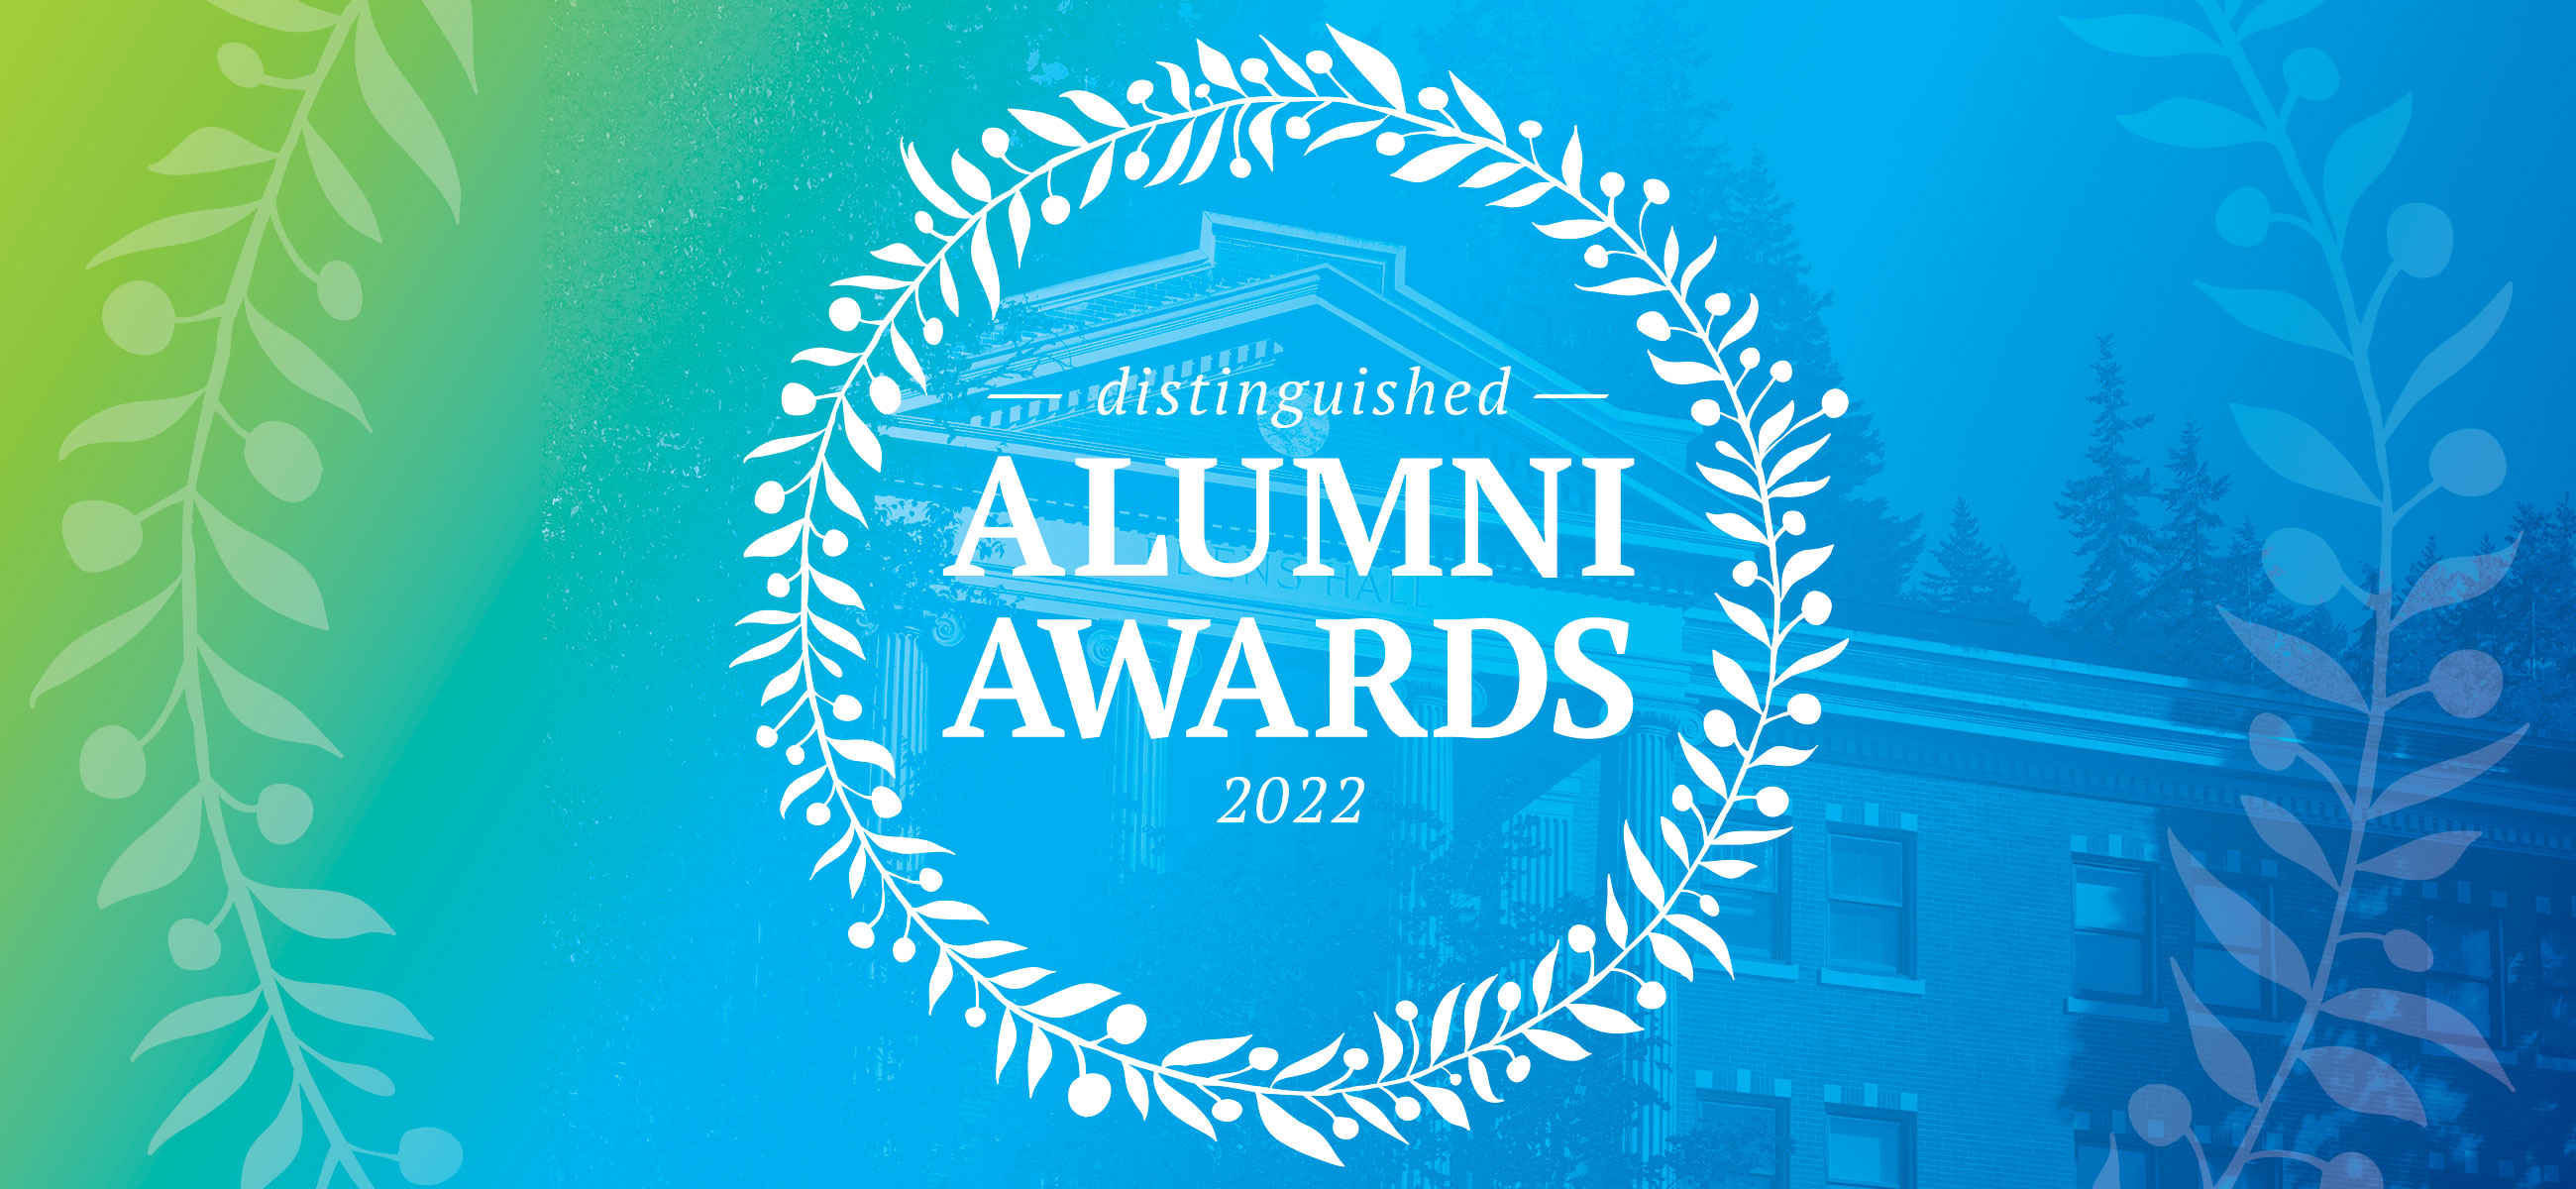 Distinguished Alumni Awards 2022 logo with a watermark Western blue to Sounders green gradient in the background